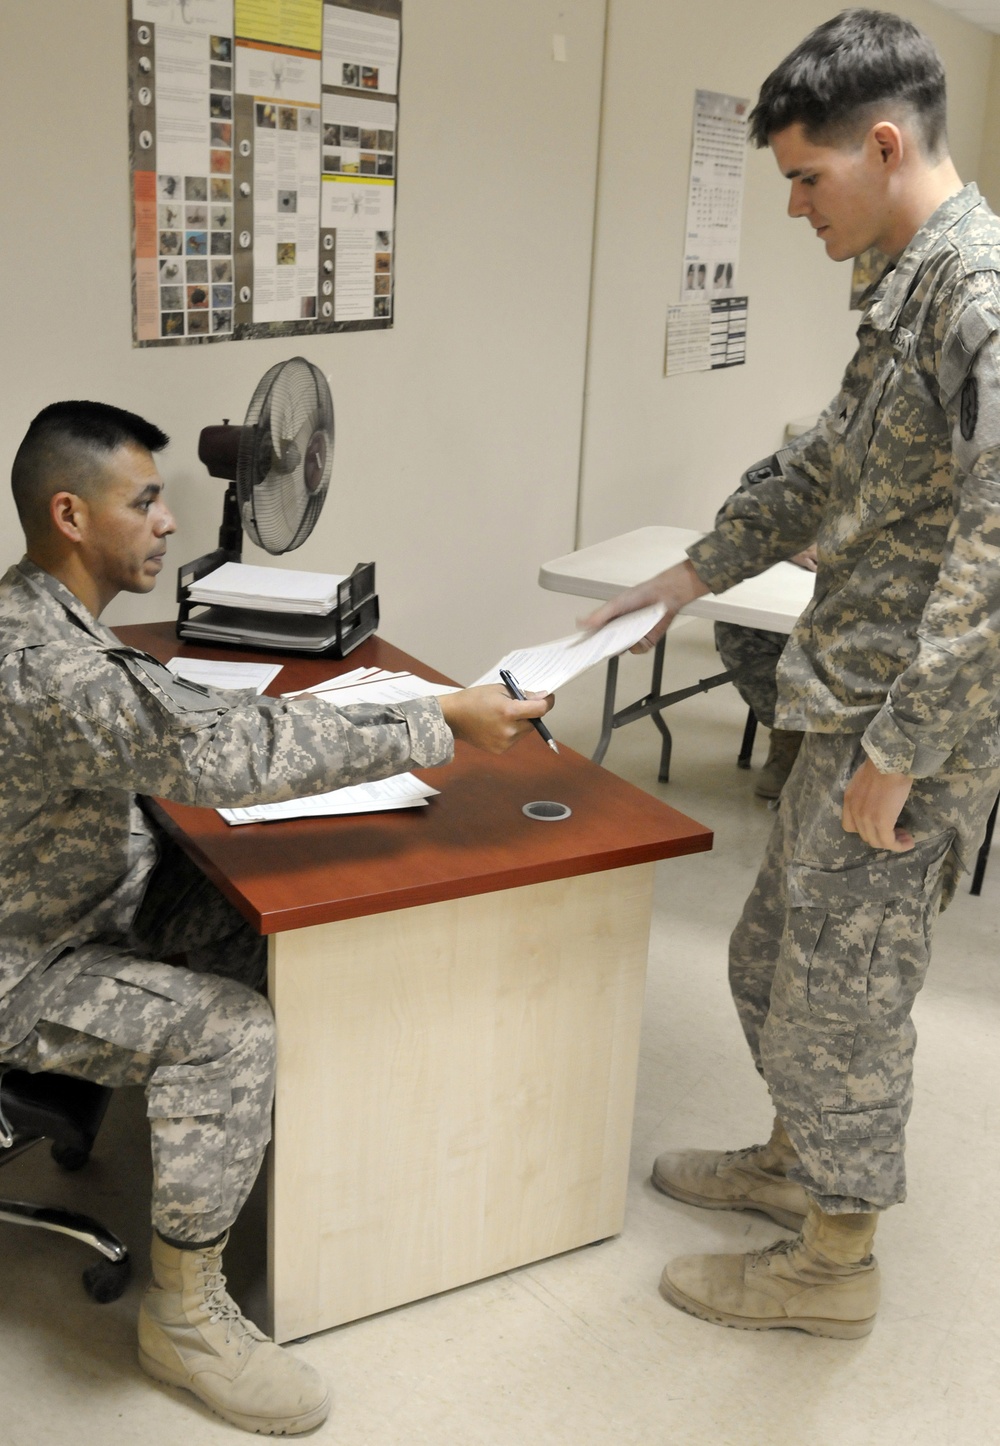 dvids-images-us-army-aviation-program-candidates-take-afast-exam-image-1-of-2